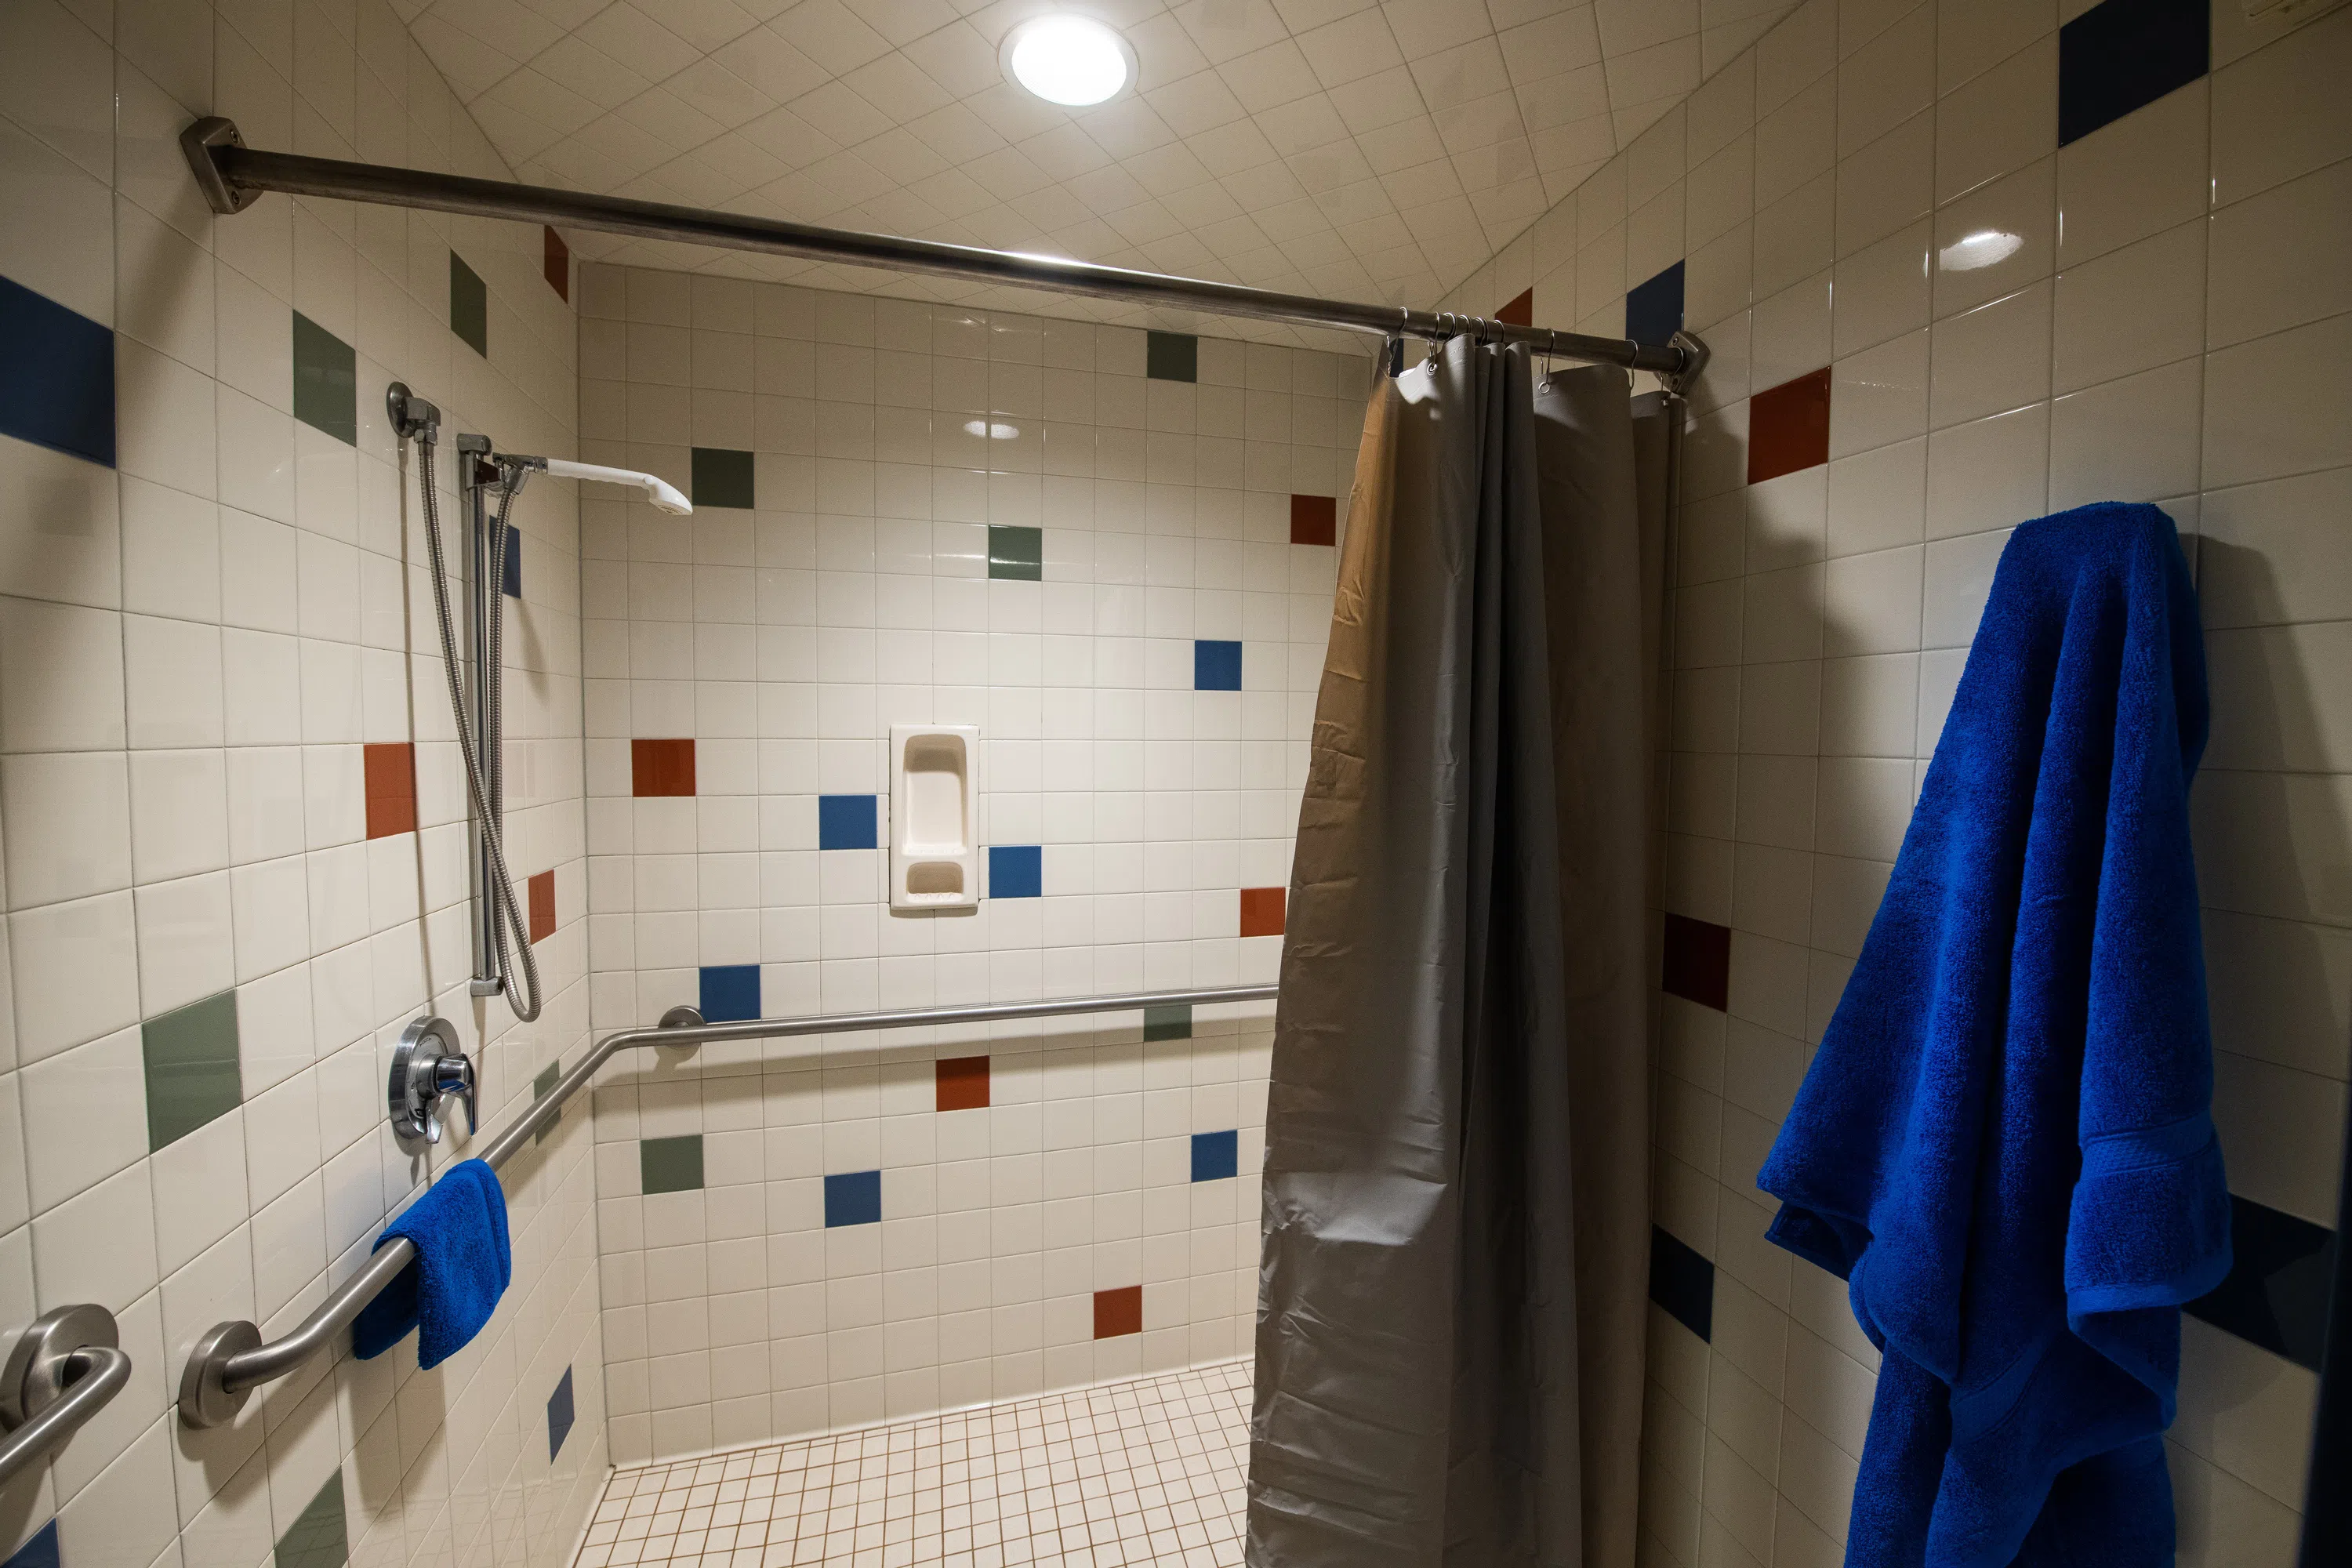 a large shower with railing and red, blue, green, and white tiles. A blue towel hangs from a hook adjacent to the shower.